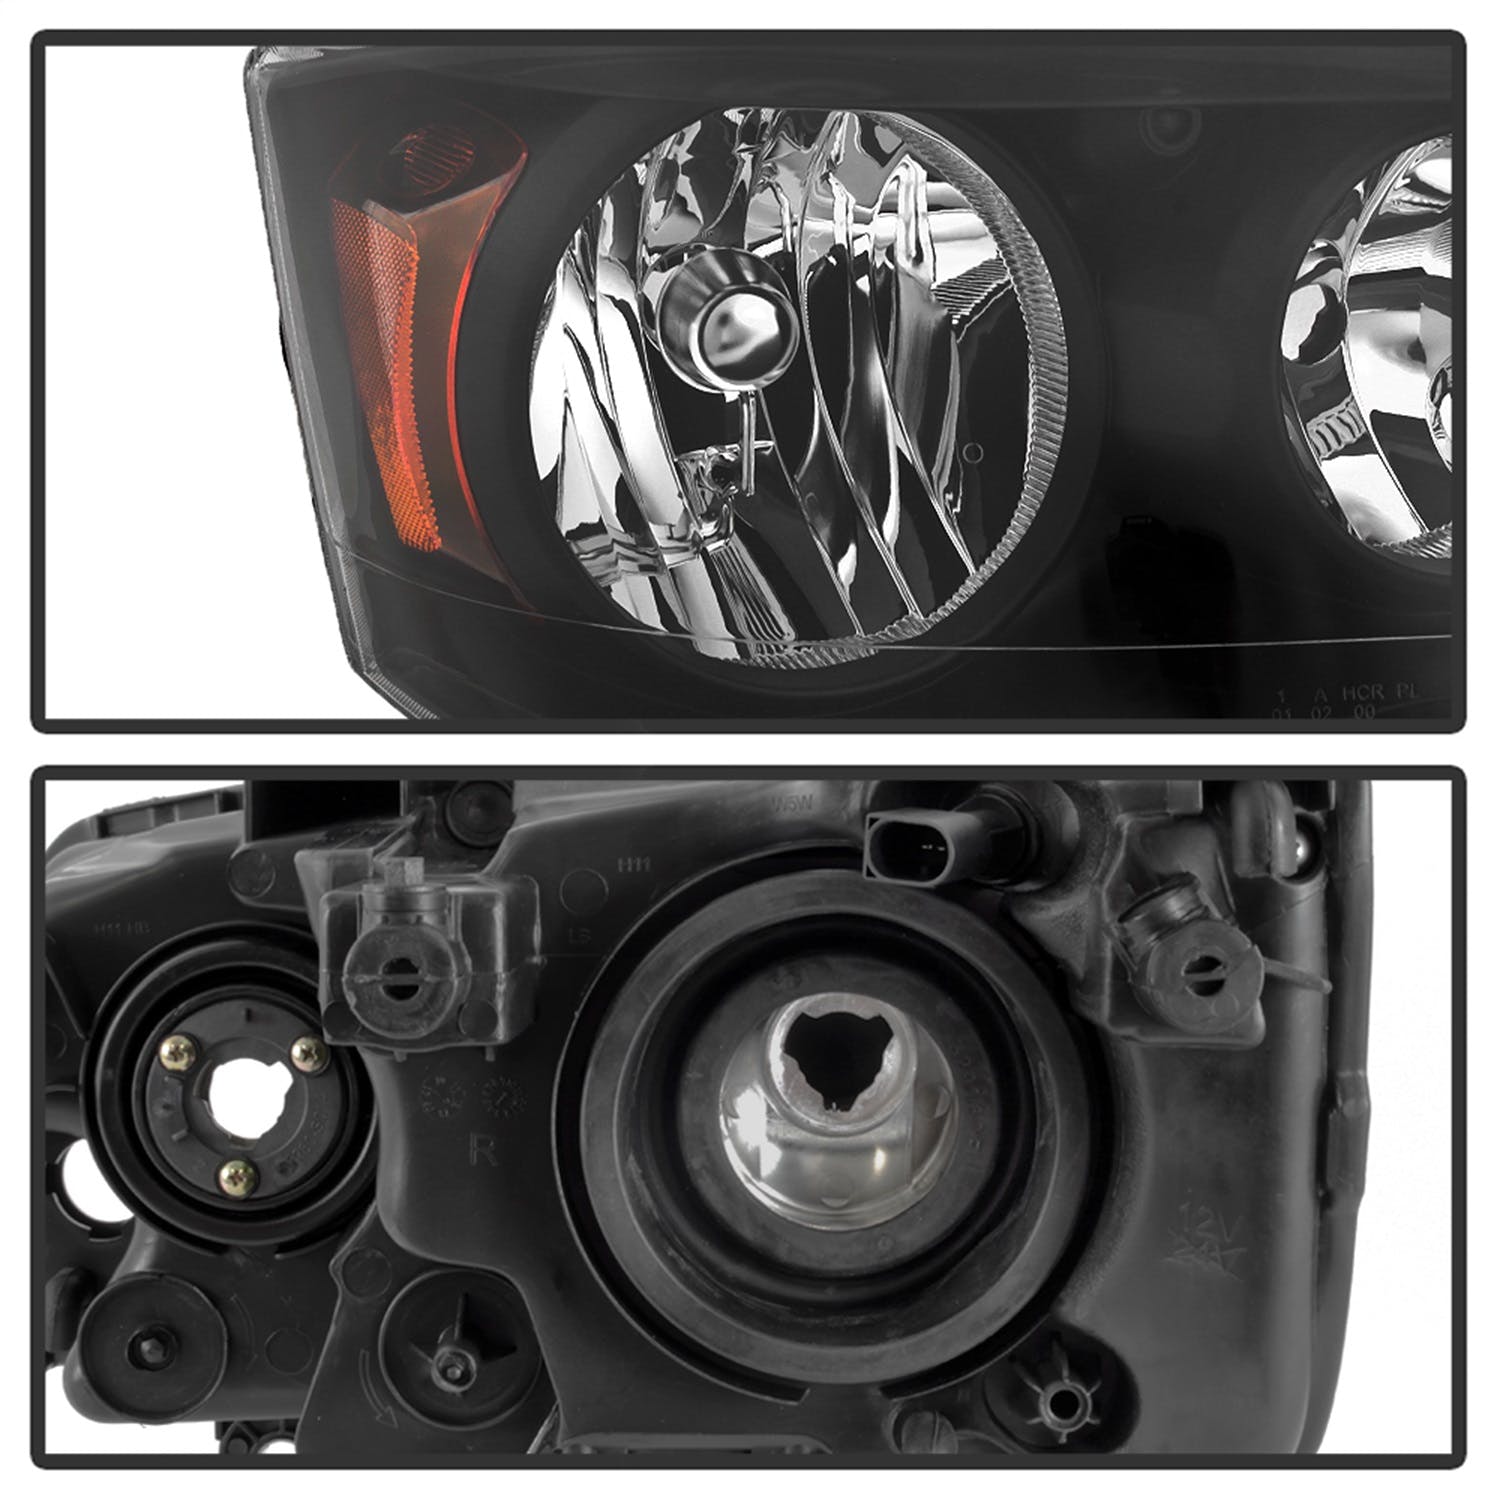 XTUNE POWER 9042492 Dodge Grand Caravan 11 17 Chrysler Town and Country 08 16 ( Does Not fit 09 10 Models with Automatic Dimming Headlights ) OEM Style Headlights Black